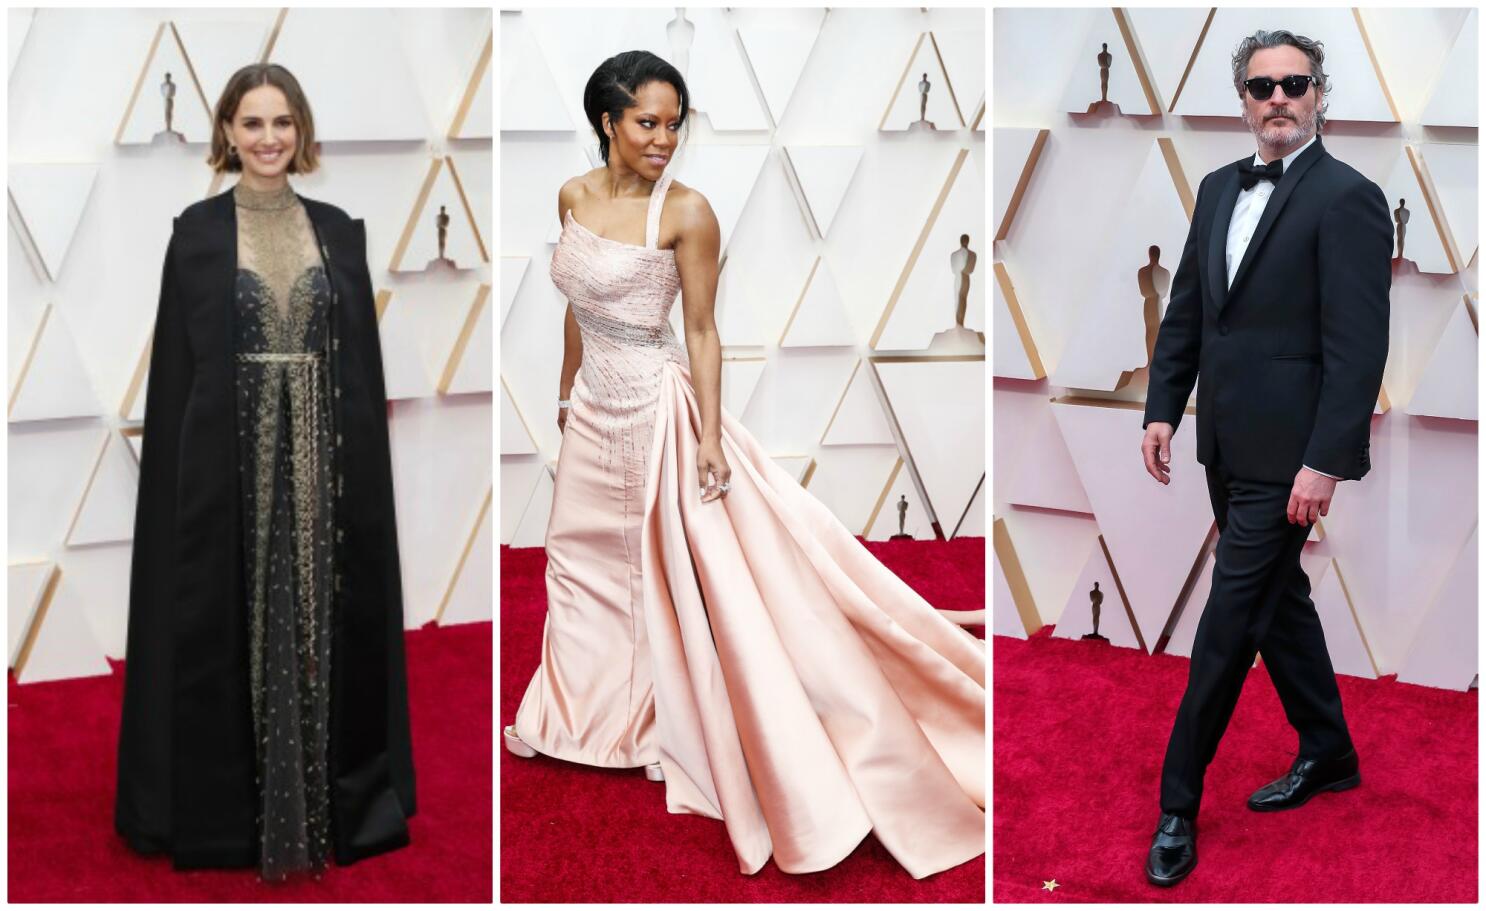 2020 Oscars fashion: Stars step out in sustainable looks - Los Angeles Times